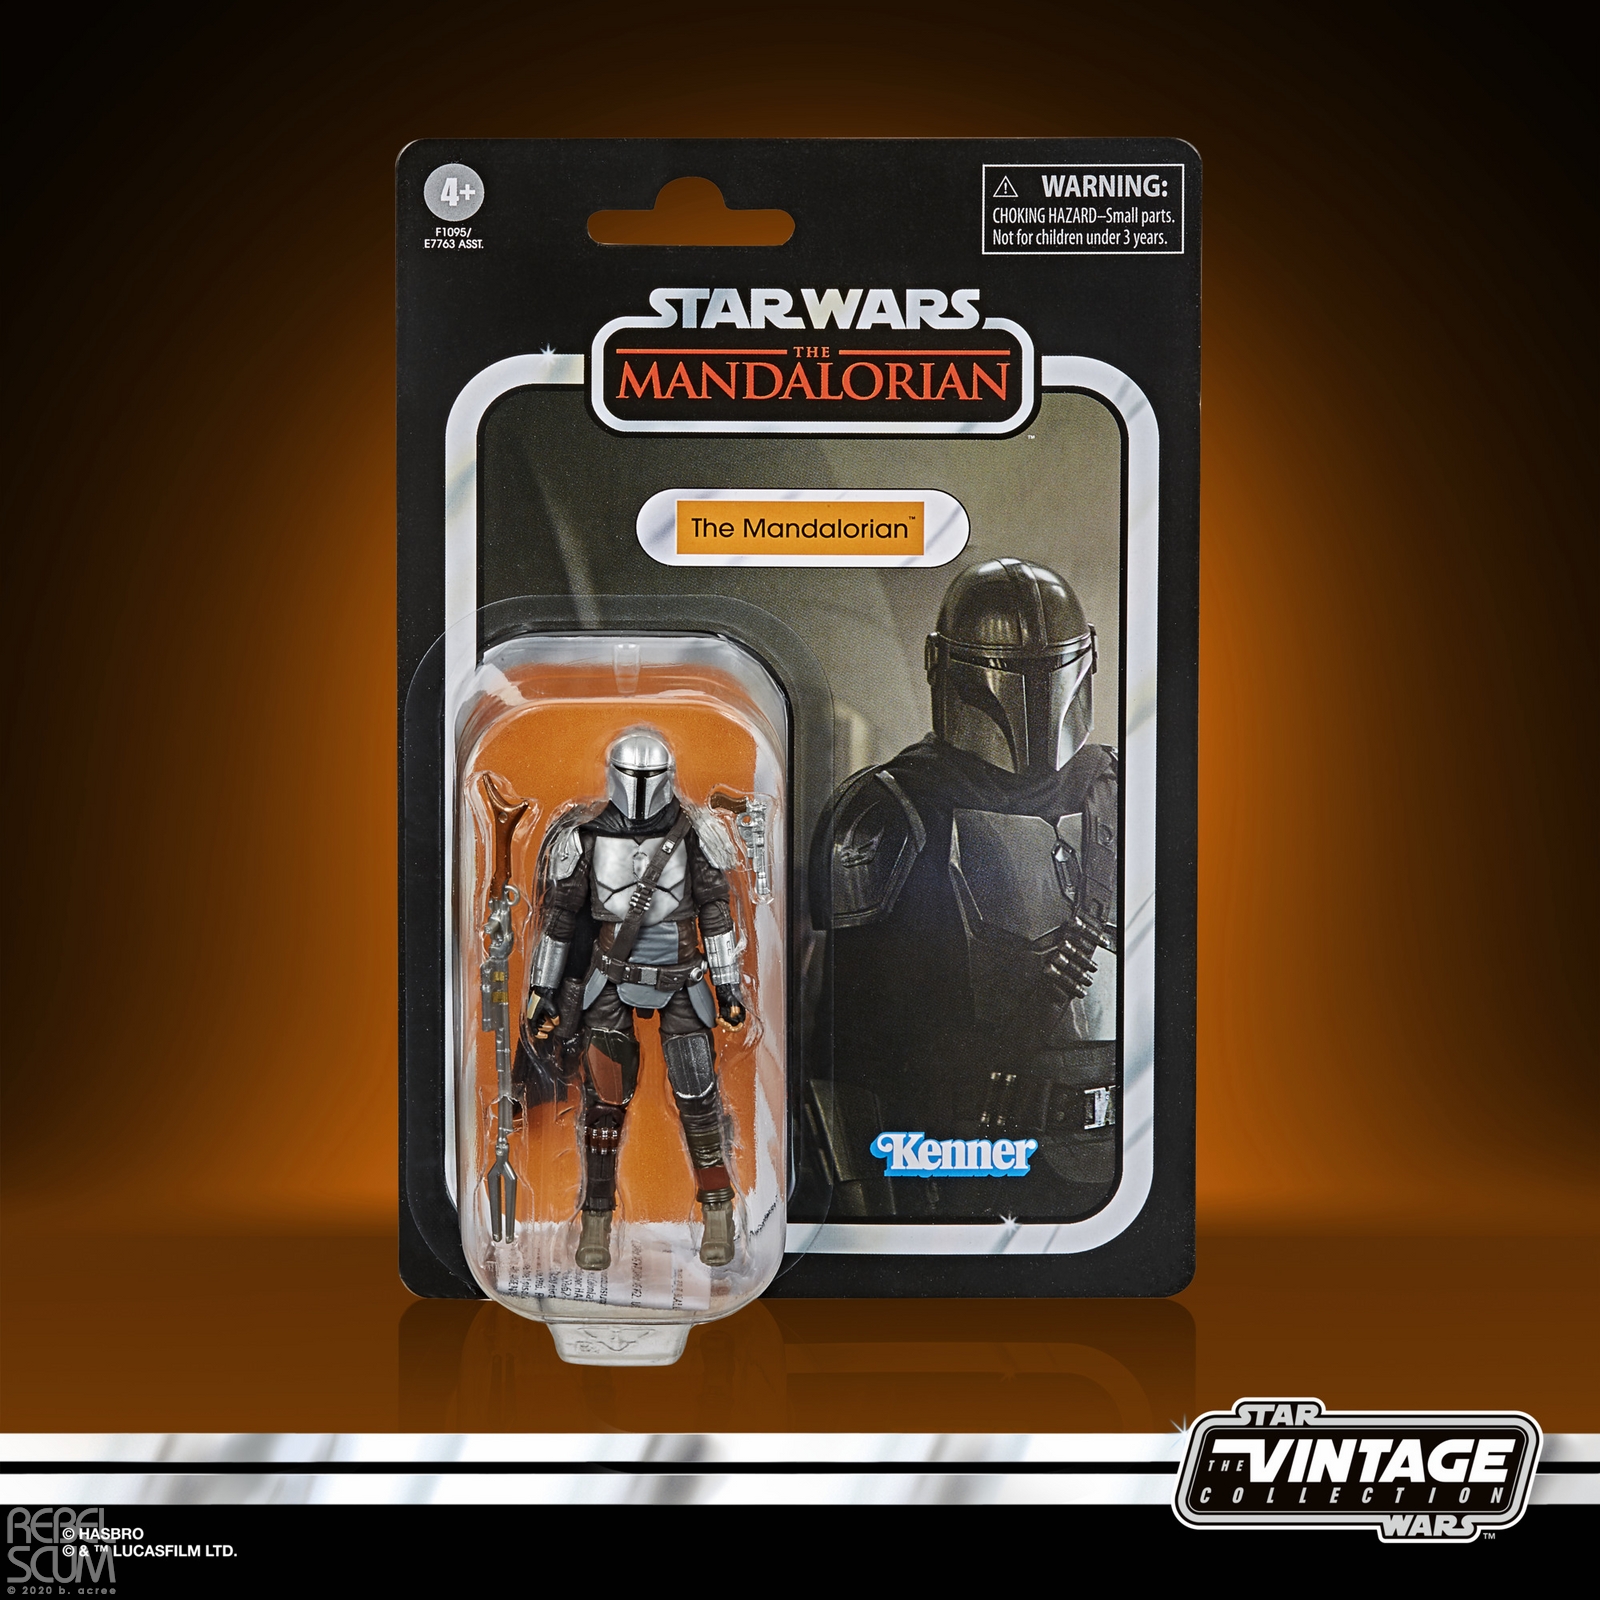 STAR WARS THE VINTAGE COLLECTION 3.75-INCH THE MANDALORIAN - oop (6).jpg